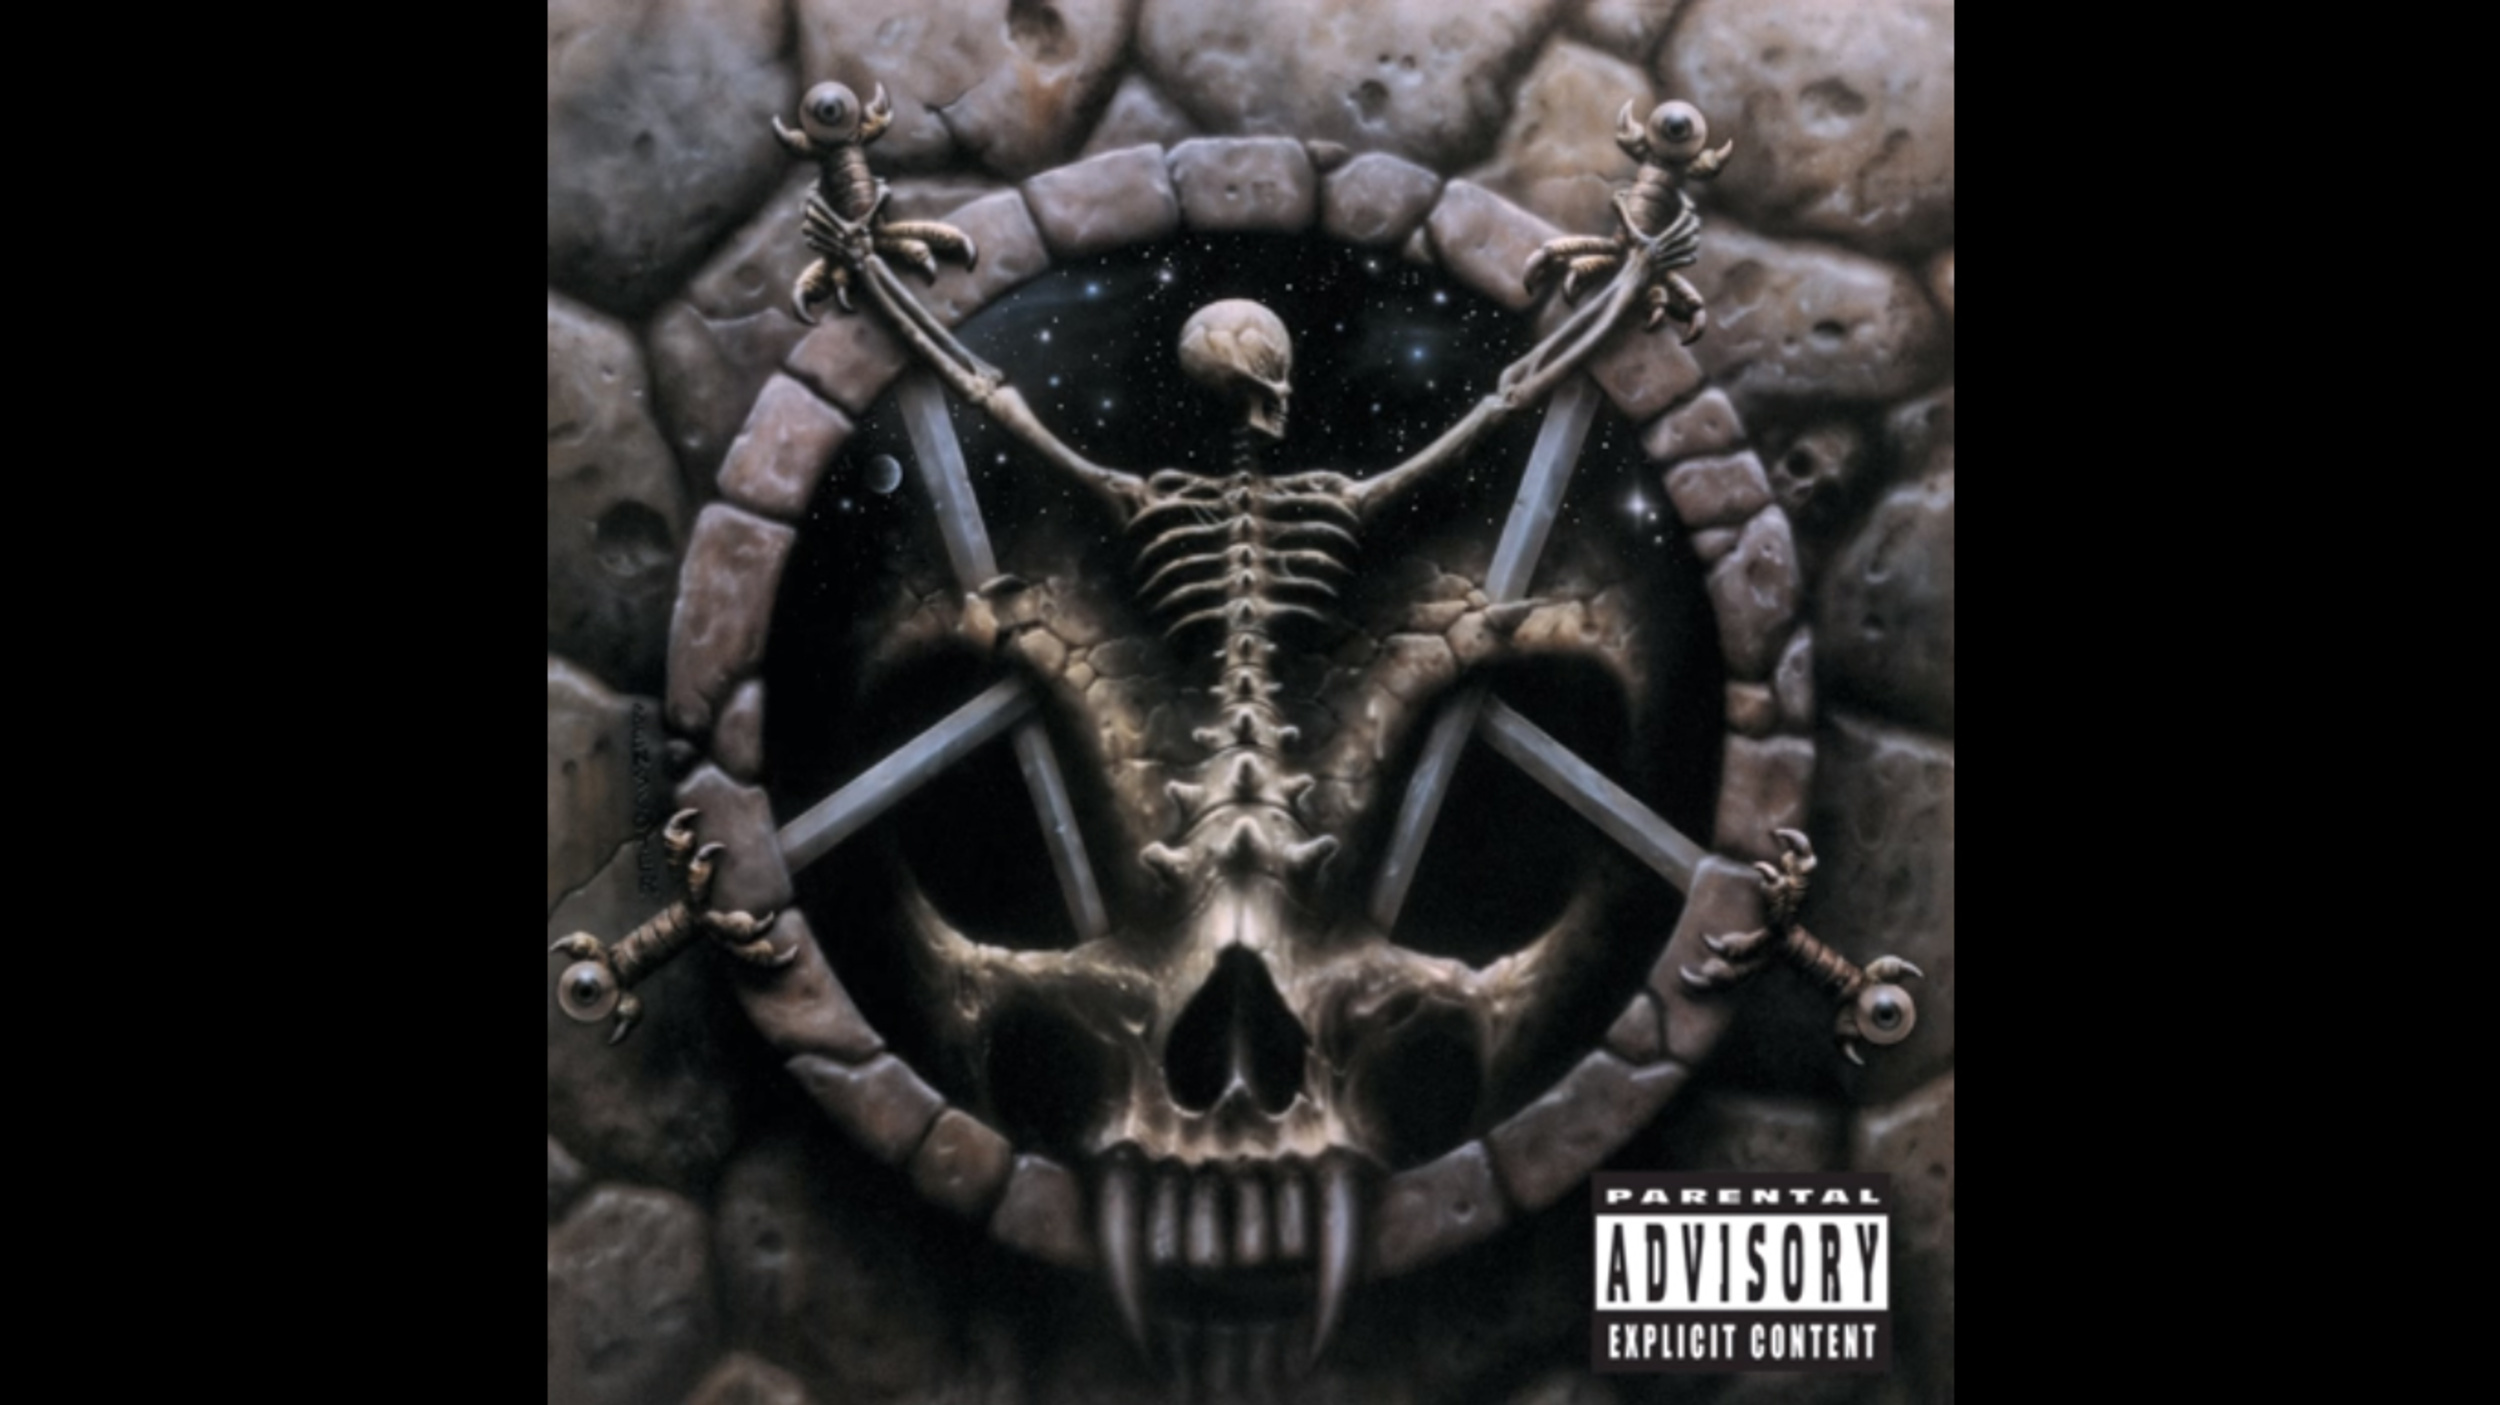 <p>When the musical landscape changes, you can adapt, or you can do what Slayer did and dig in deep and stay the course. A lot had changed in the four years from 1990's <em>Seasons In the Abyss</em> to 1994's<em> Divine Intervention</em>. The only thing Slayer changed was drummers, swapping out Dave Lombardo for Paul Bostaph. At the time, the album has a mixed reception, but the nice thing about staying the same through cultural changes — it's less embarrassing when you look back.</p><p><a href='https://www.msn.com/en-us/community/channel/vid-cj9pqbr0vn9in2b6ddcd8sfgpfq6x6utp44fssrv6mc2gtybw0us'>Follow us on MSN to see more of our exclusive entertainment content.</a></p>